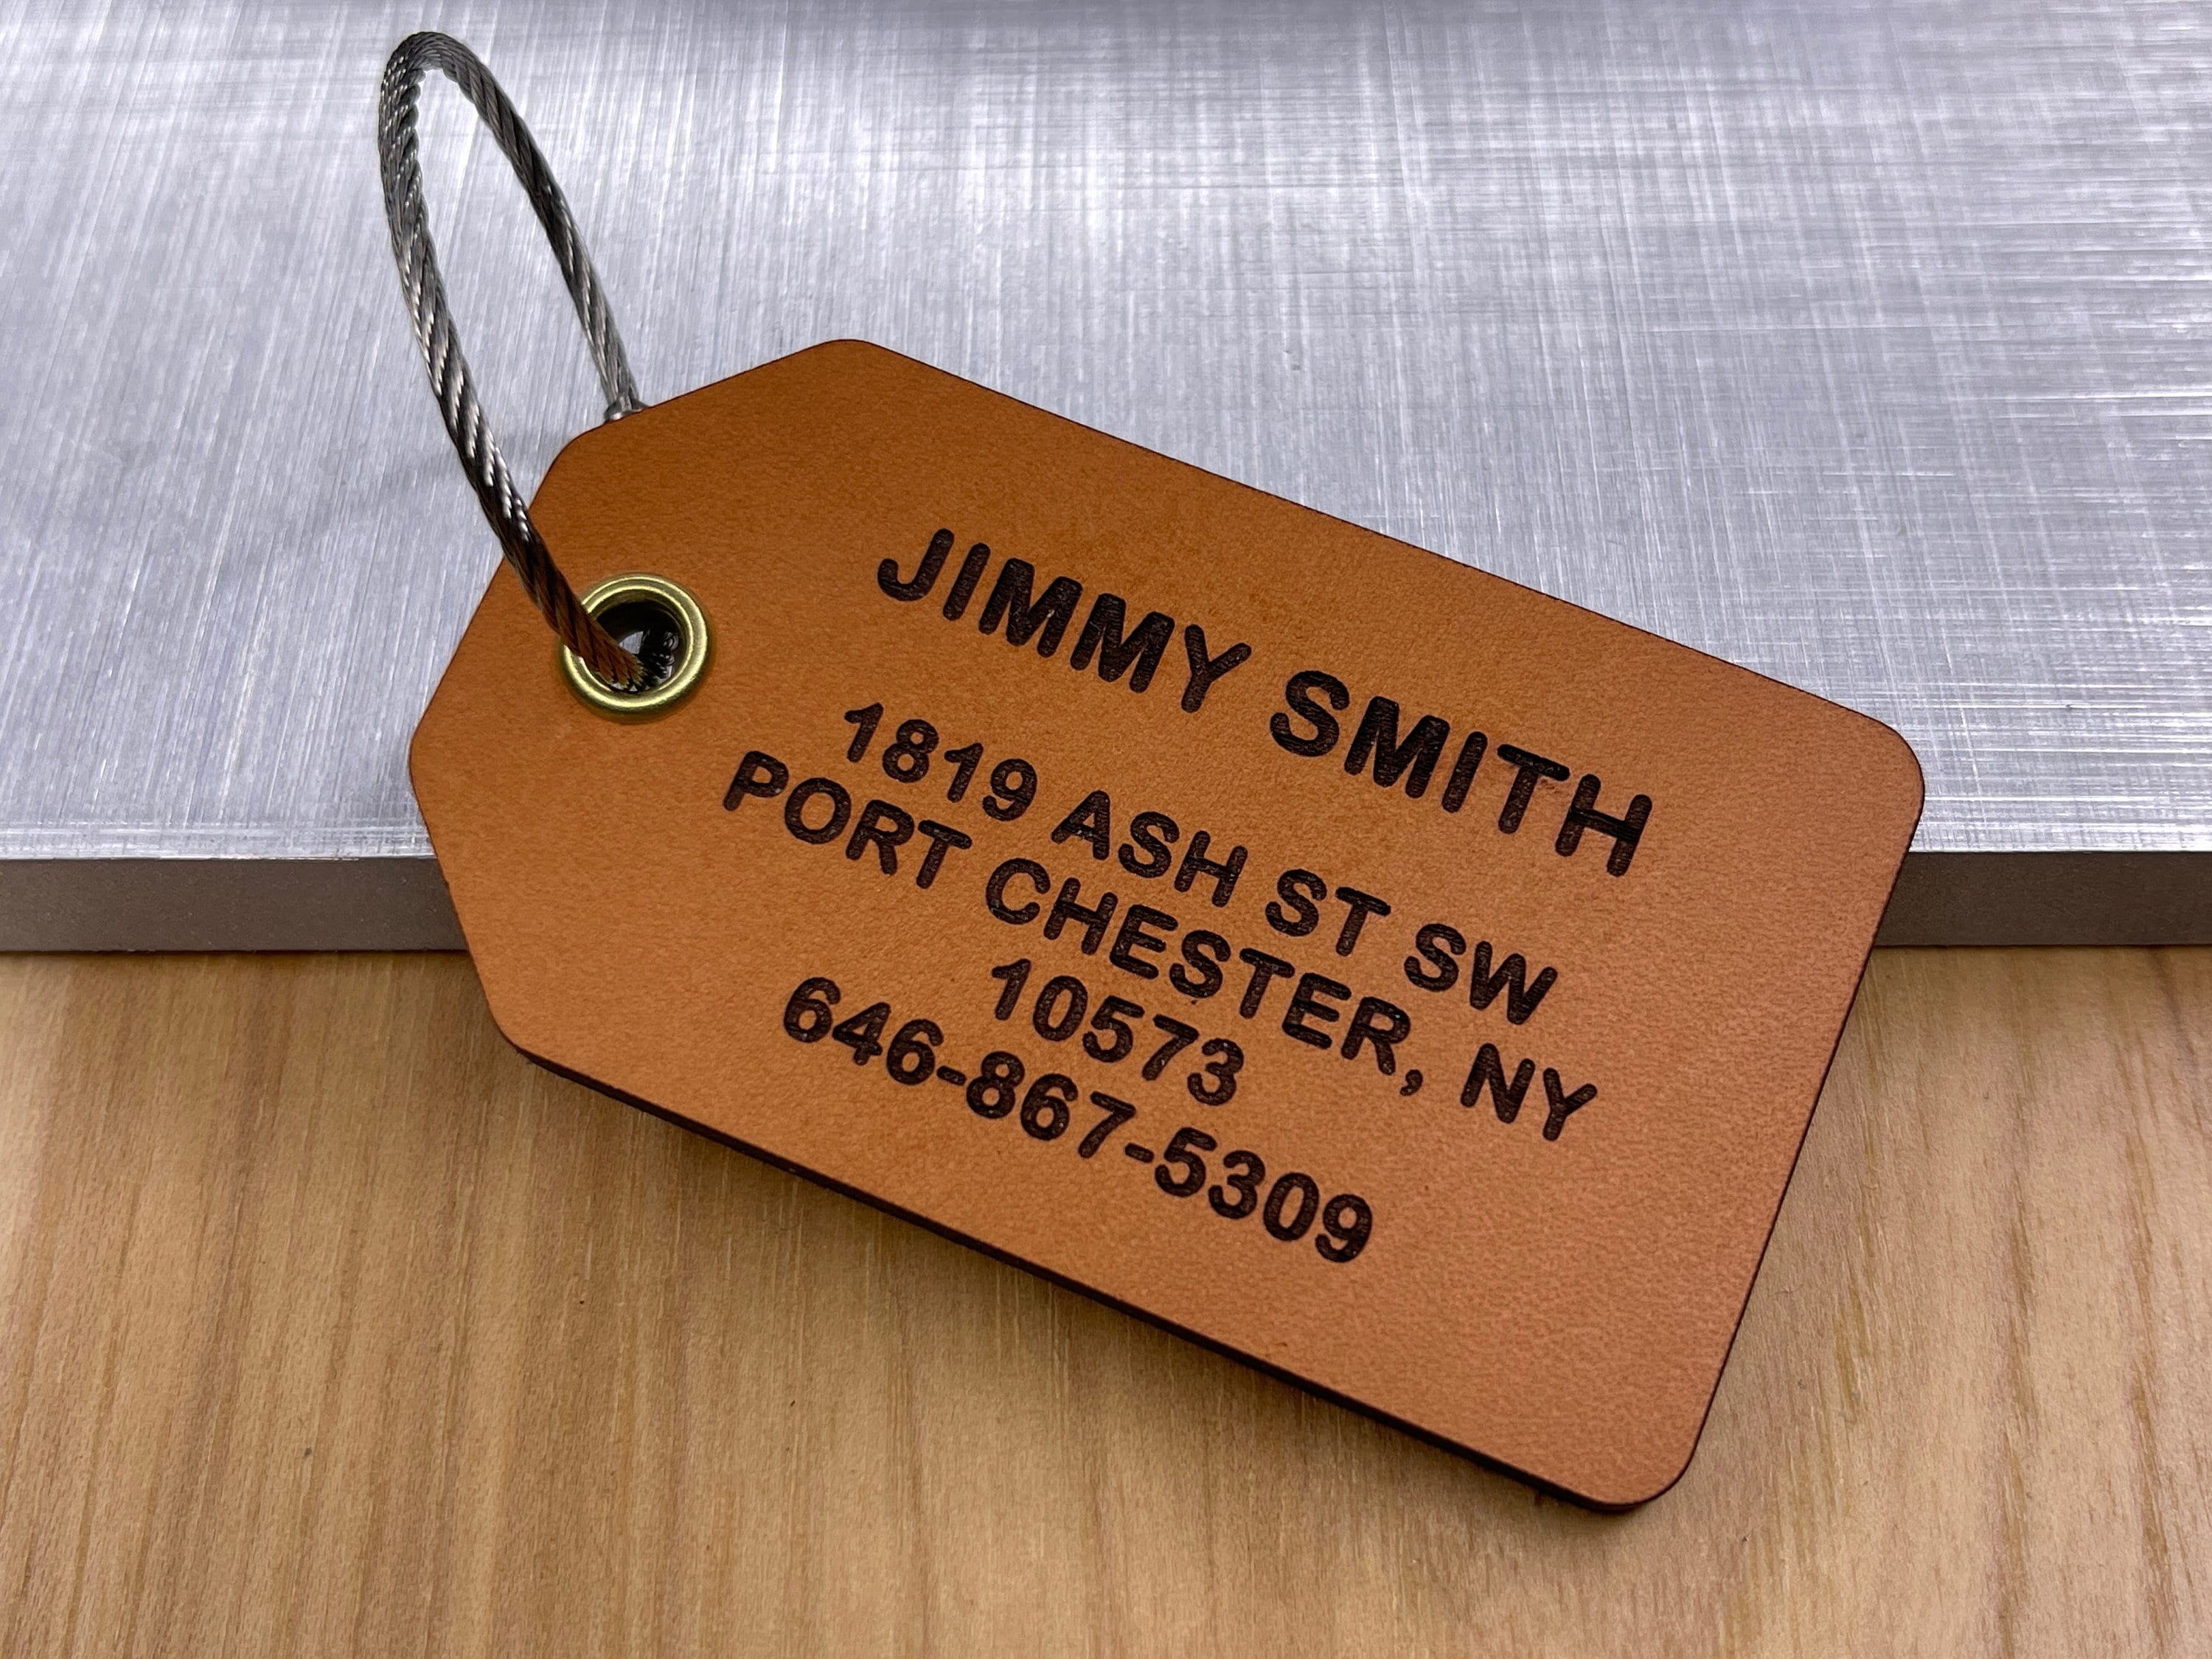 Custom Personalized Leather Luggage Tags - Blue - Perfect gift